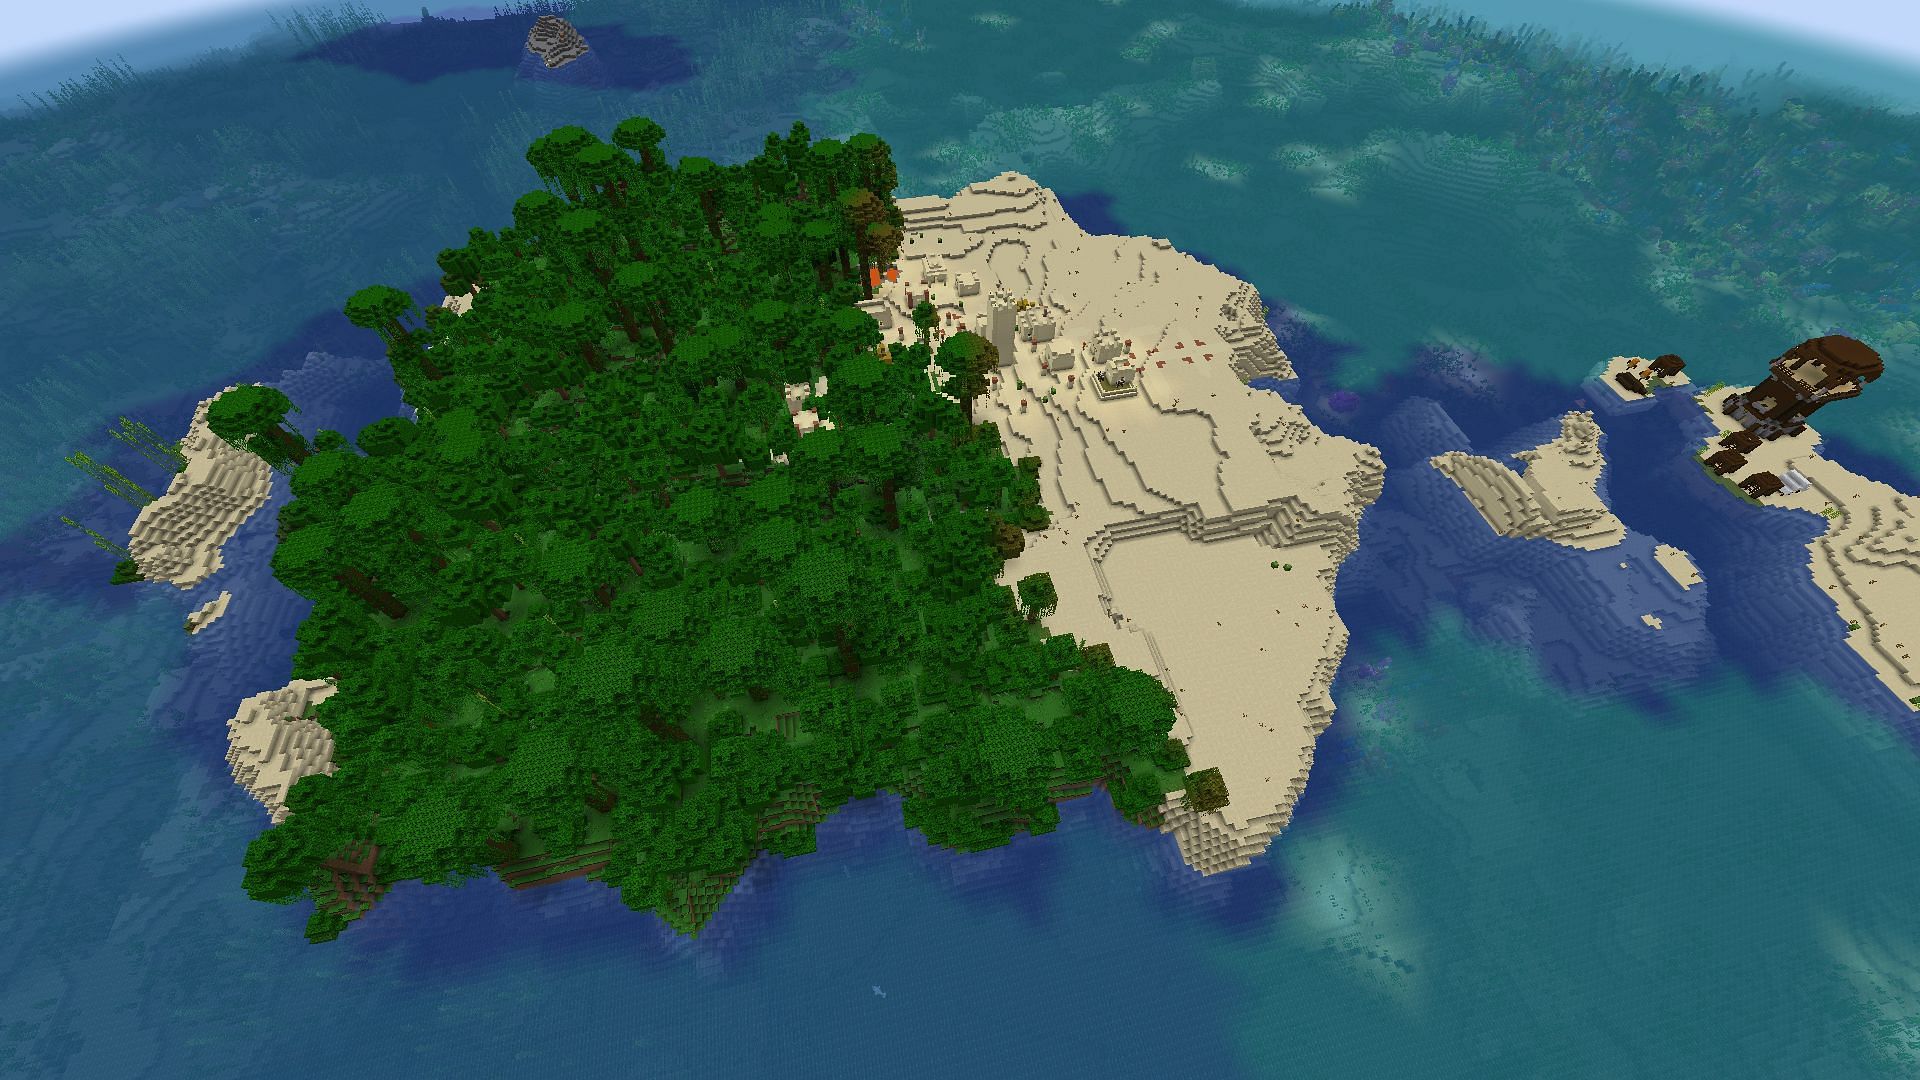 Will players restore the desert of this island or leave the jungle as is? (Image via Stofix_/Reddit)